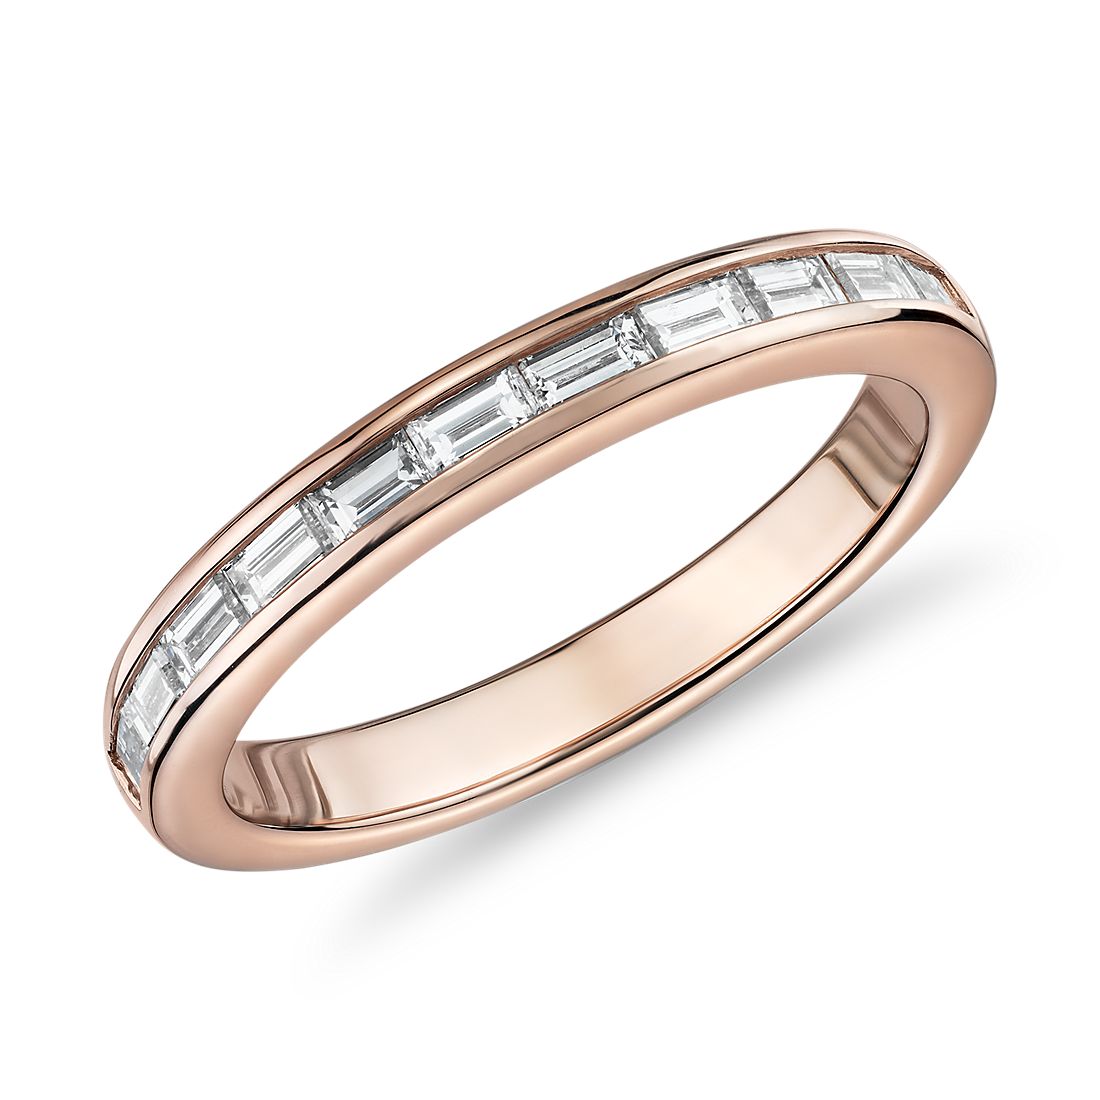 Channel-Set Baguette Diamond Ring in 14k Rose Gold (1/2 ct. tw.)